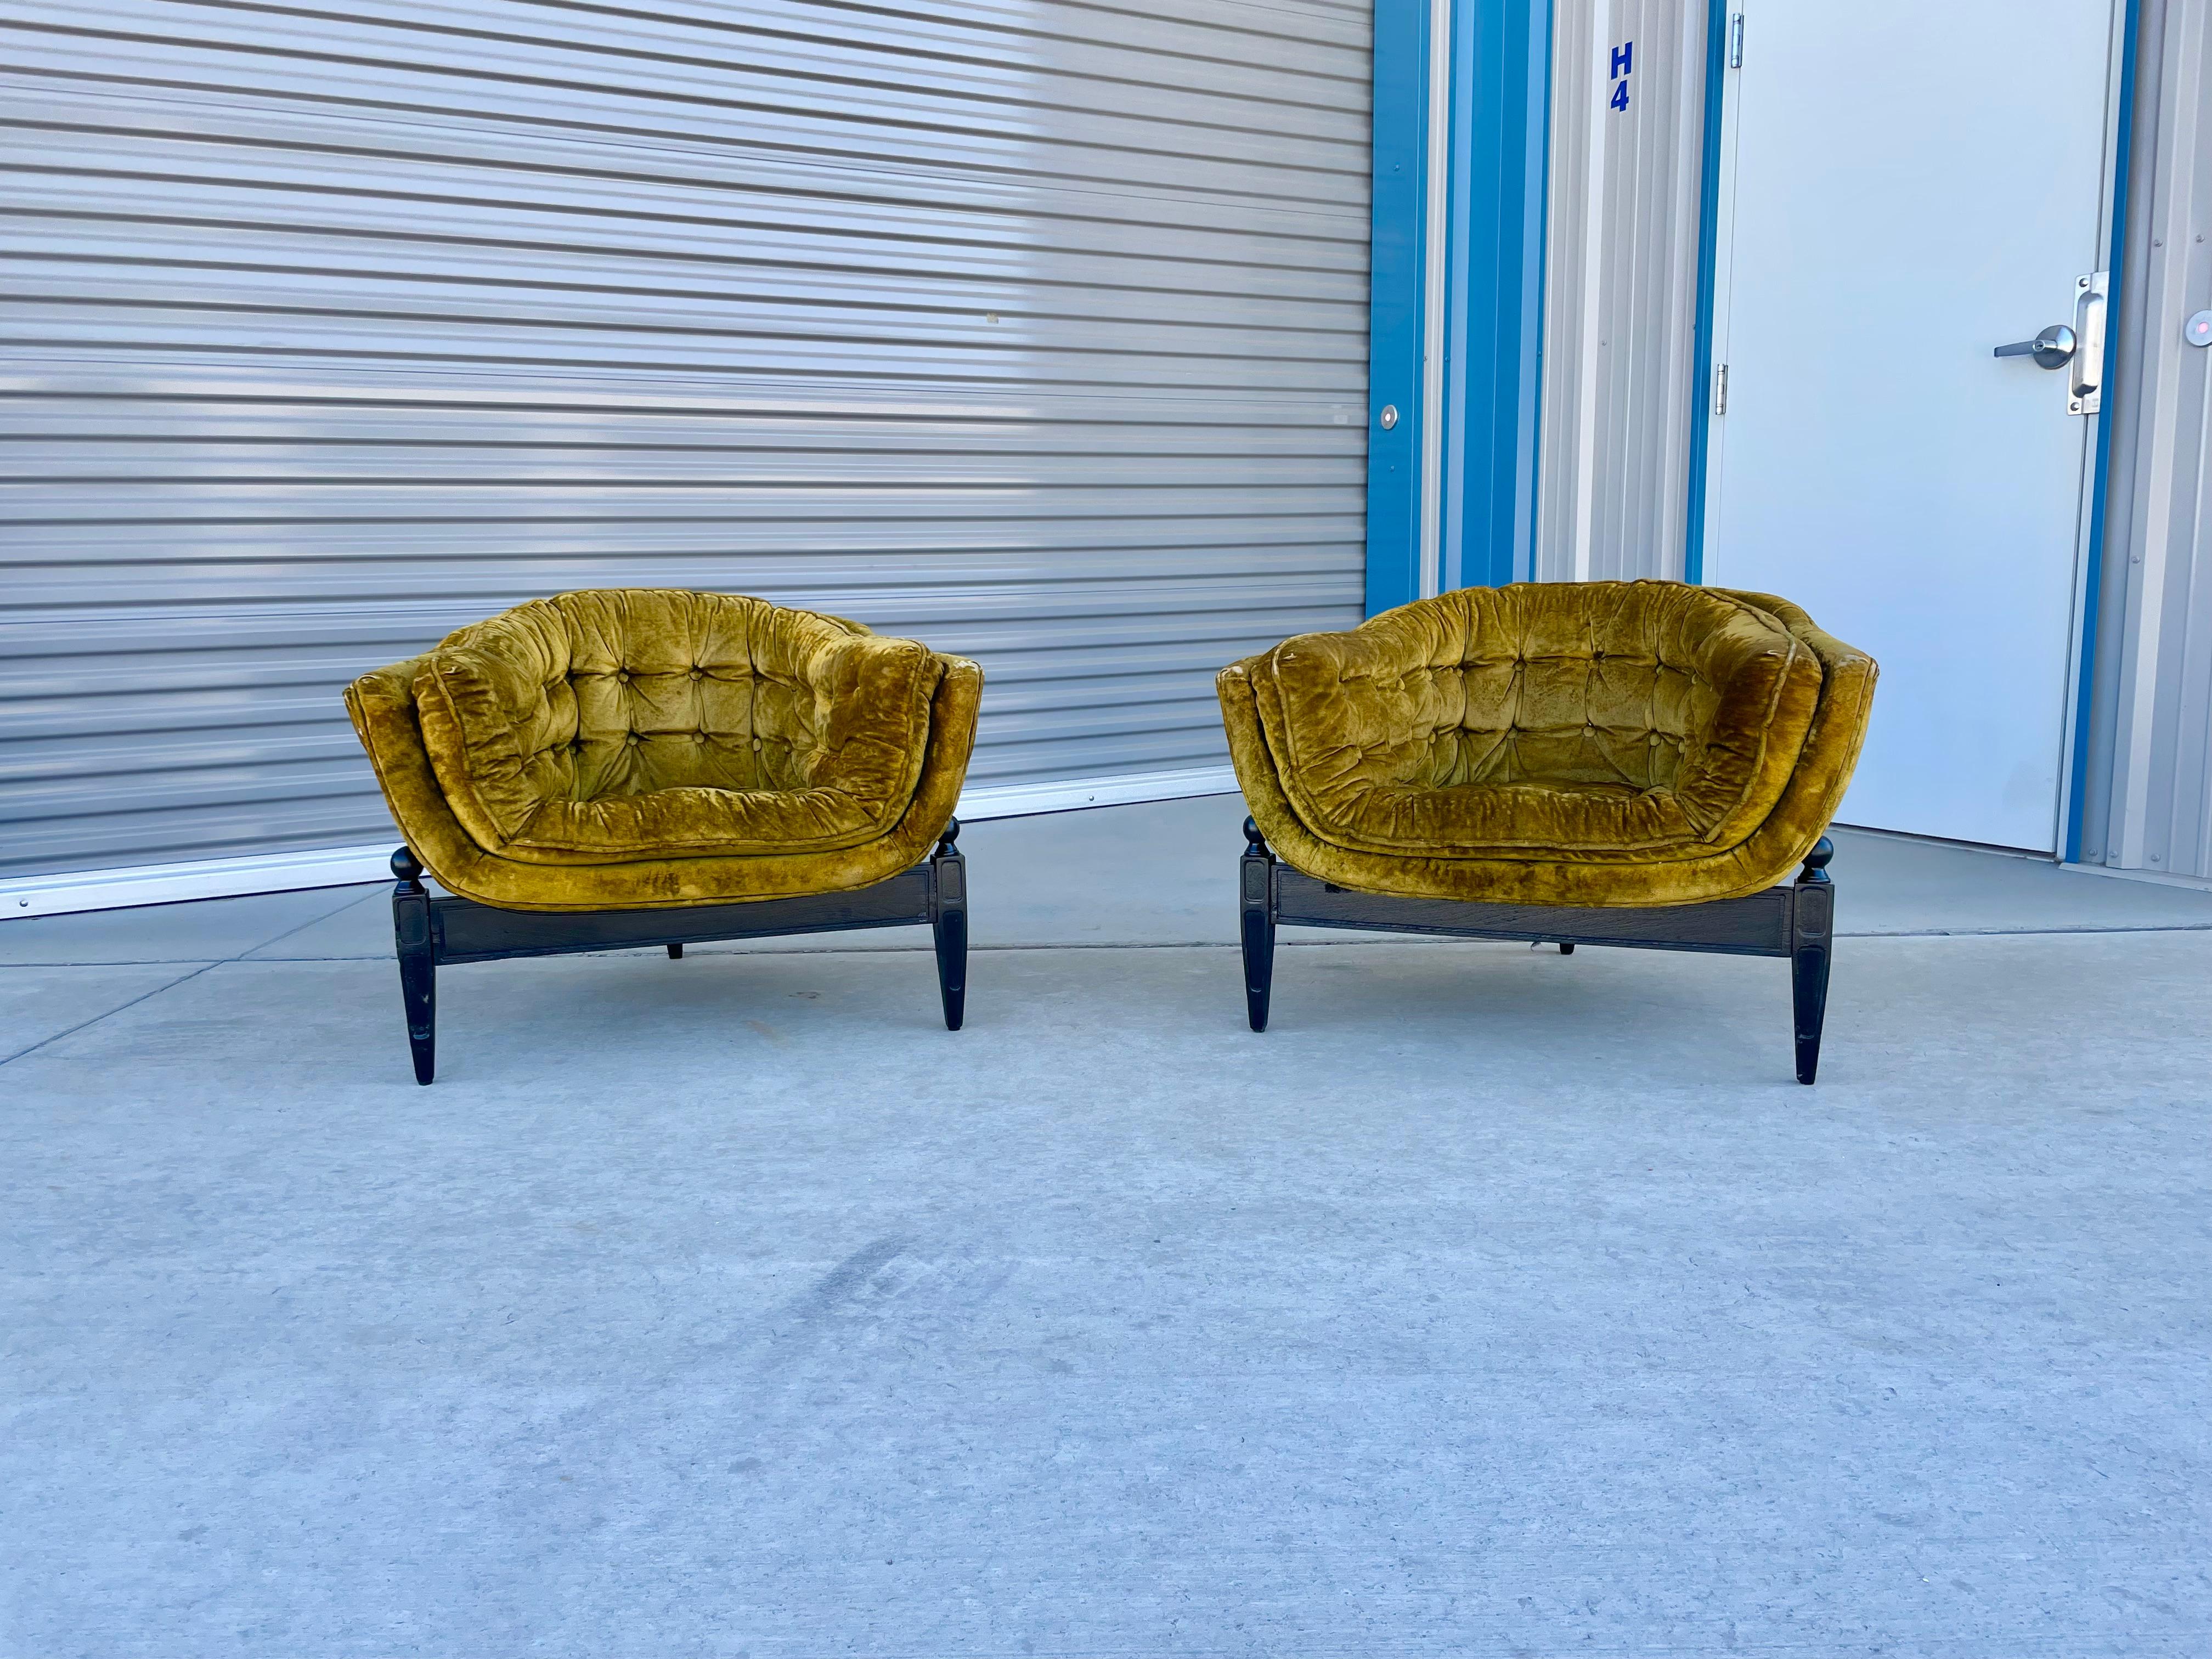 Mid-century lounge chairs were designed and manufactured by Castro Convertibles circa 1960s. These chairs feature green tufted upholstery with a wide curved backrest, which offers solid support and comfort for your back. The chairs also feature a